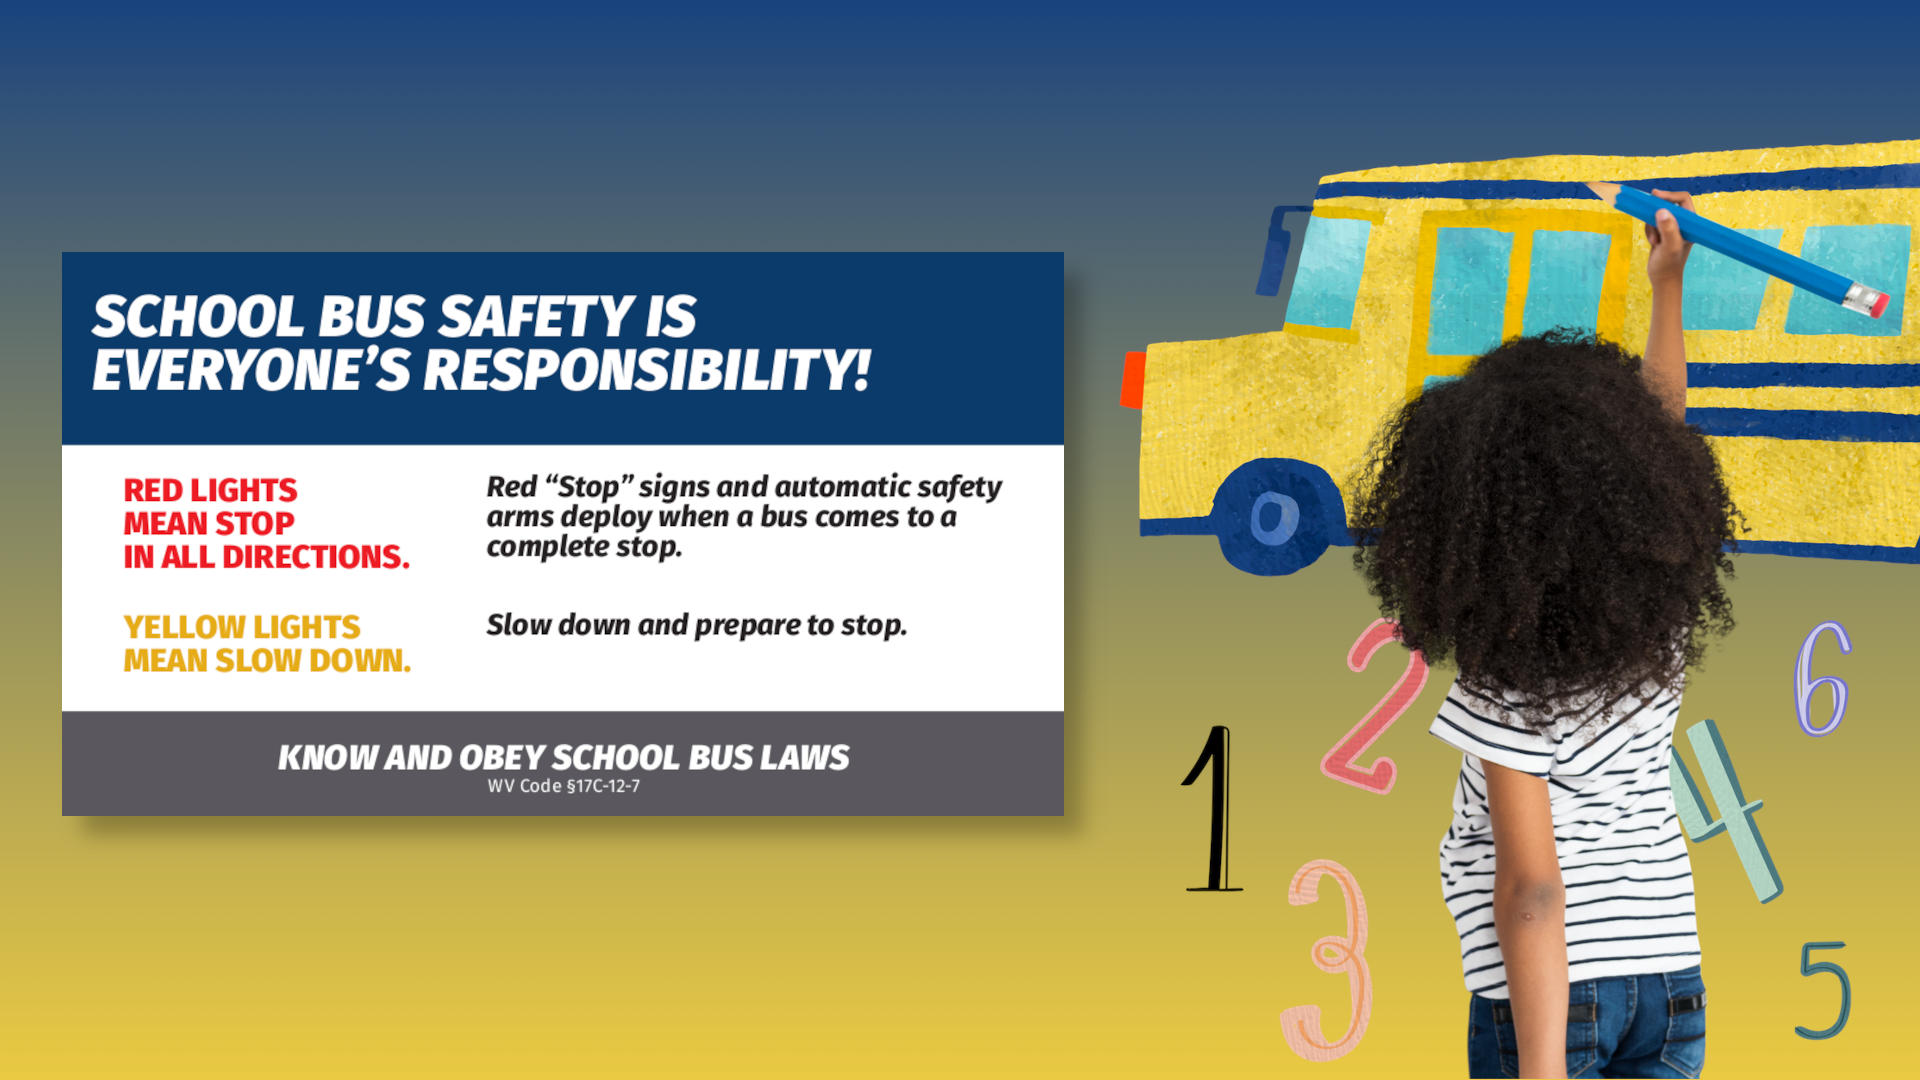 bus safety - image of young girl drawing a bus with information regarding bus safety